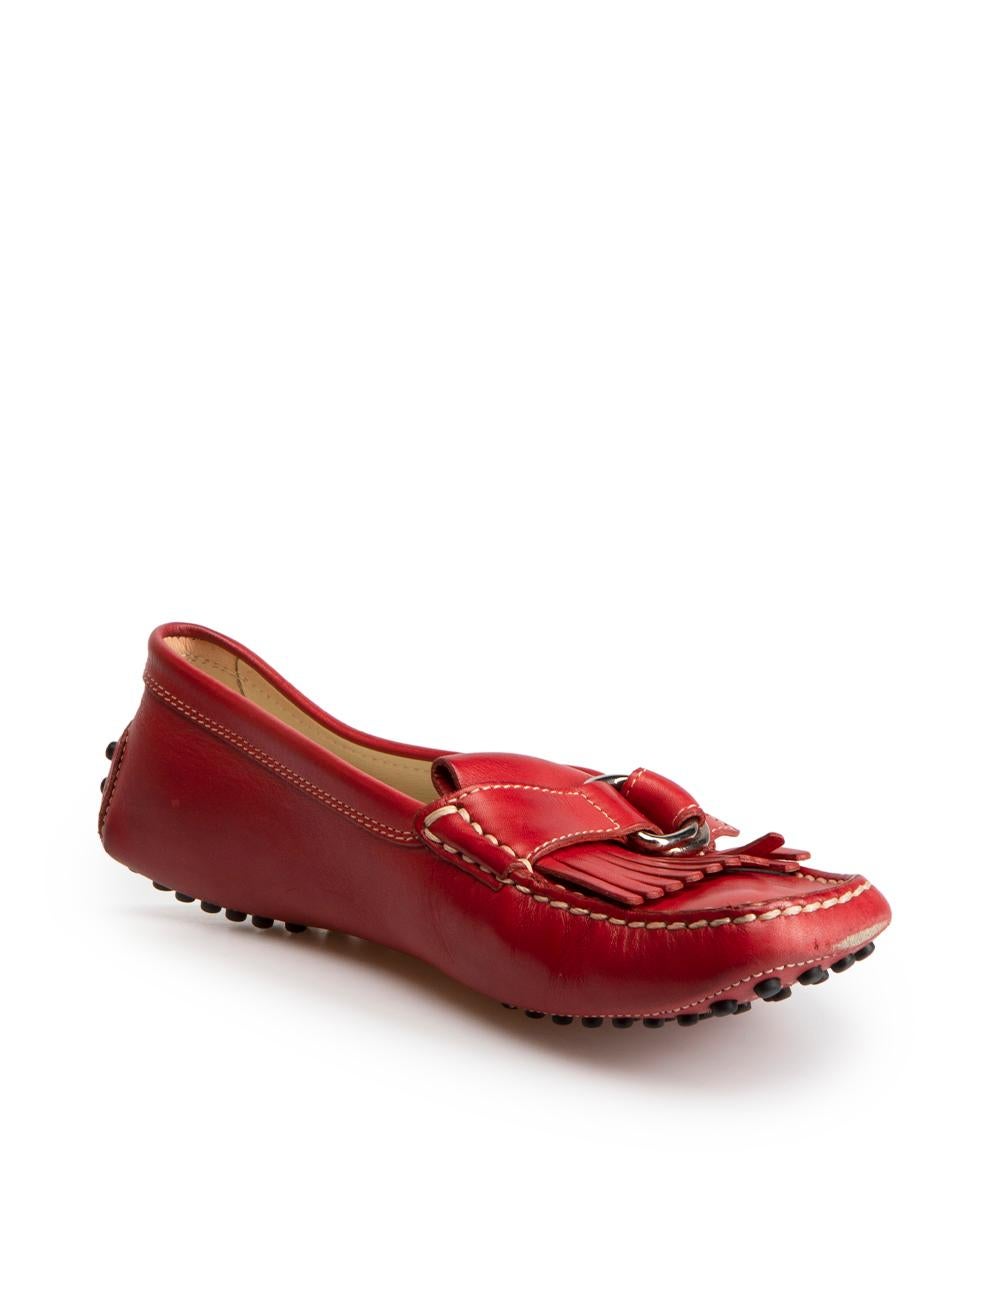 CONDITION is Good. General wear to flats is evident. Moderate signs of wear to with mild abrasion seen at both the heels and toes. Noticeable discolouration of both the exterior and insole leathers on this used Tod's designer resale item.
 
